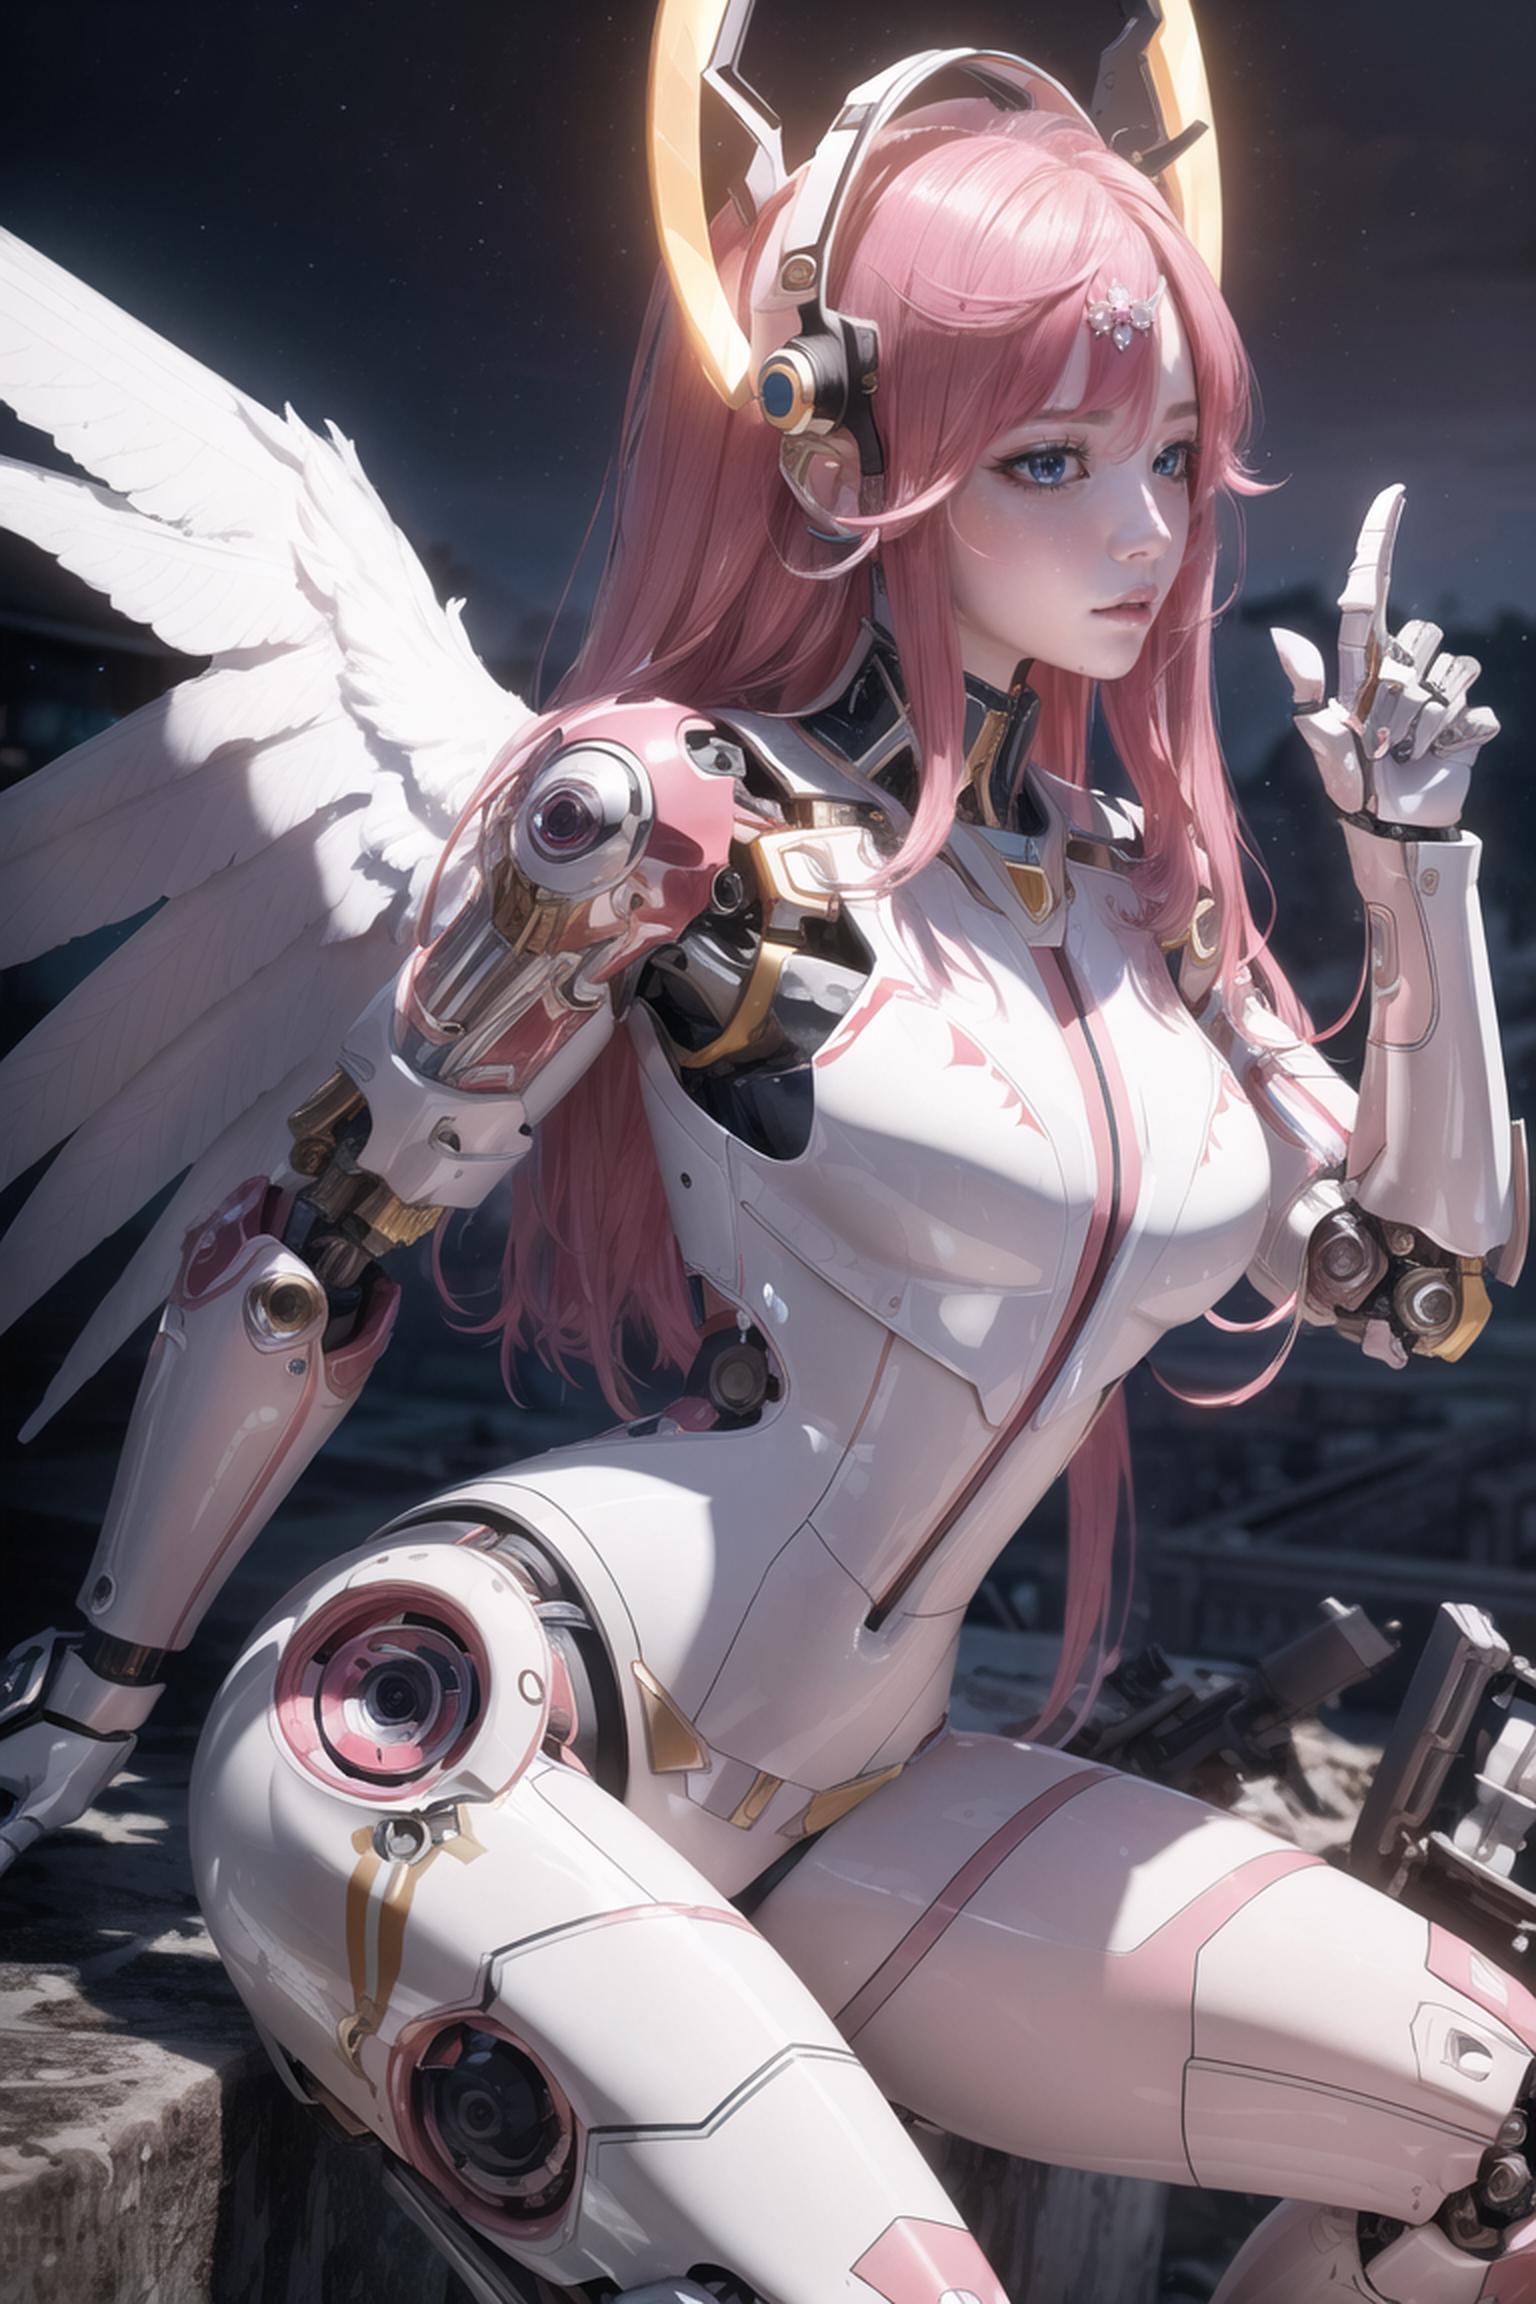 A pink-haired robotic woman with wings and a sword.